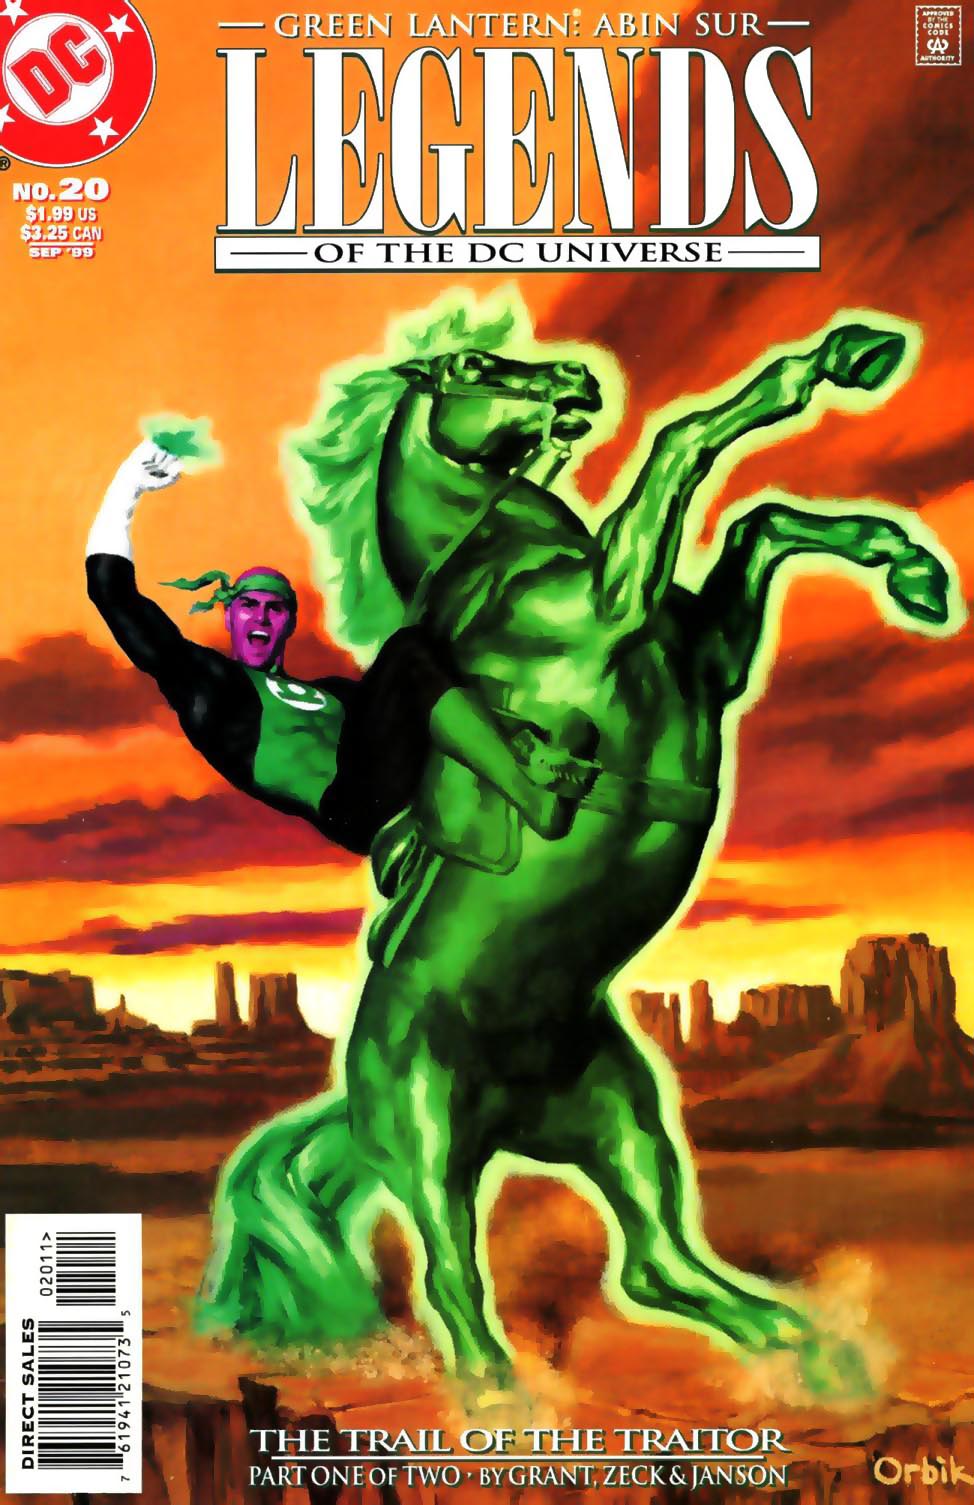 Read online Legends of the DC Universe comic -  Issue #20 - 1